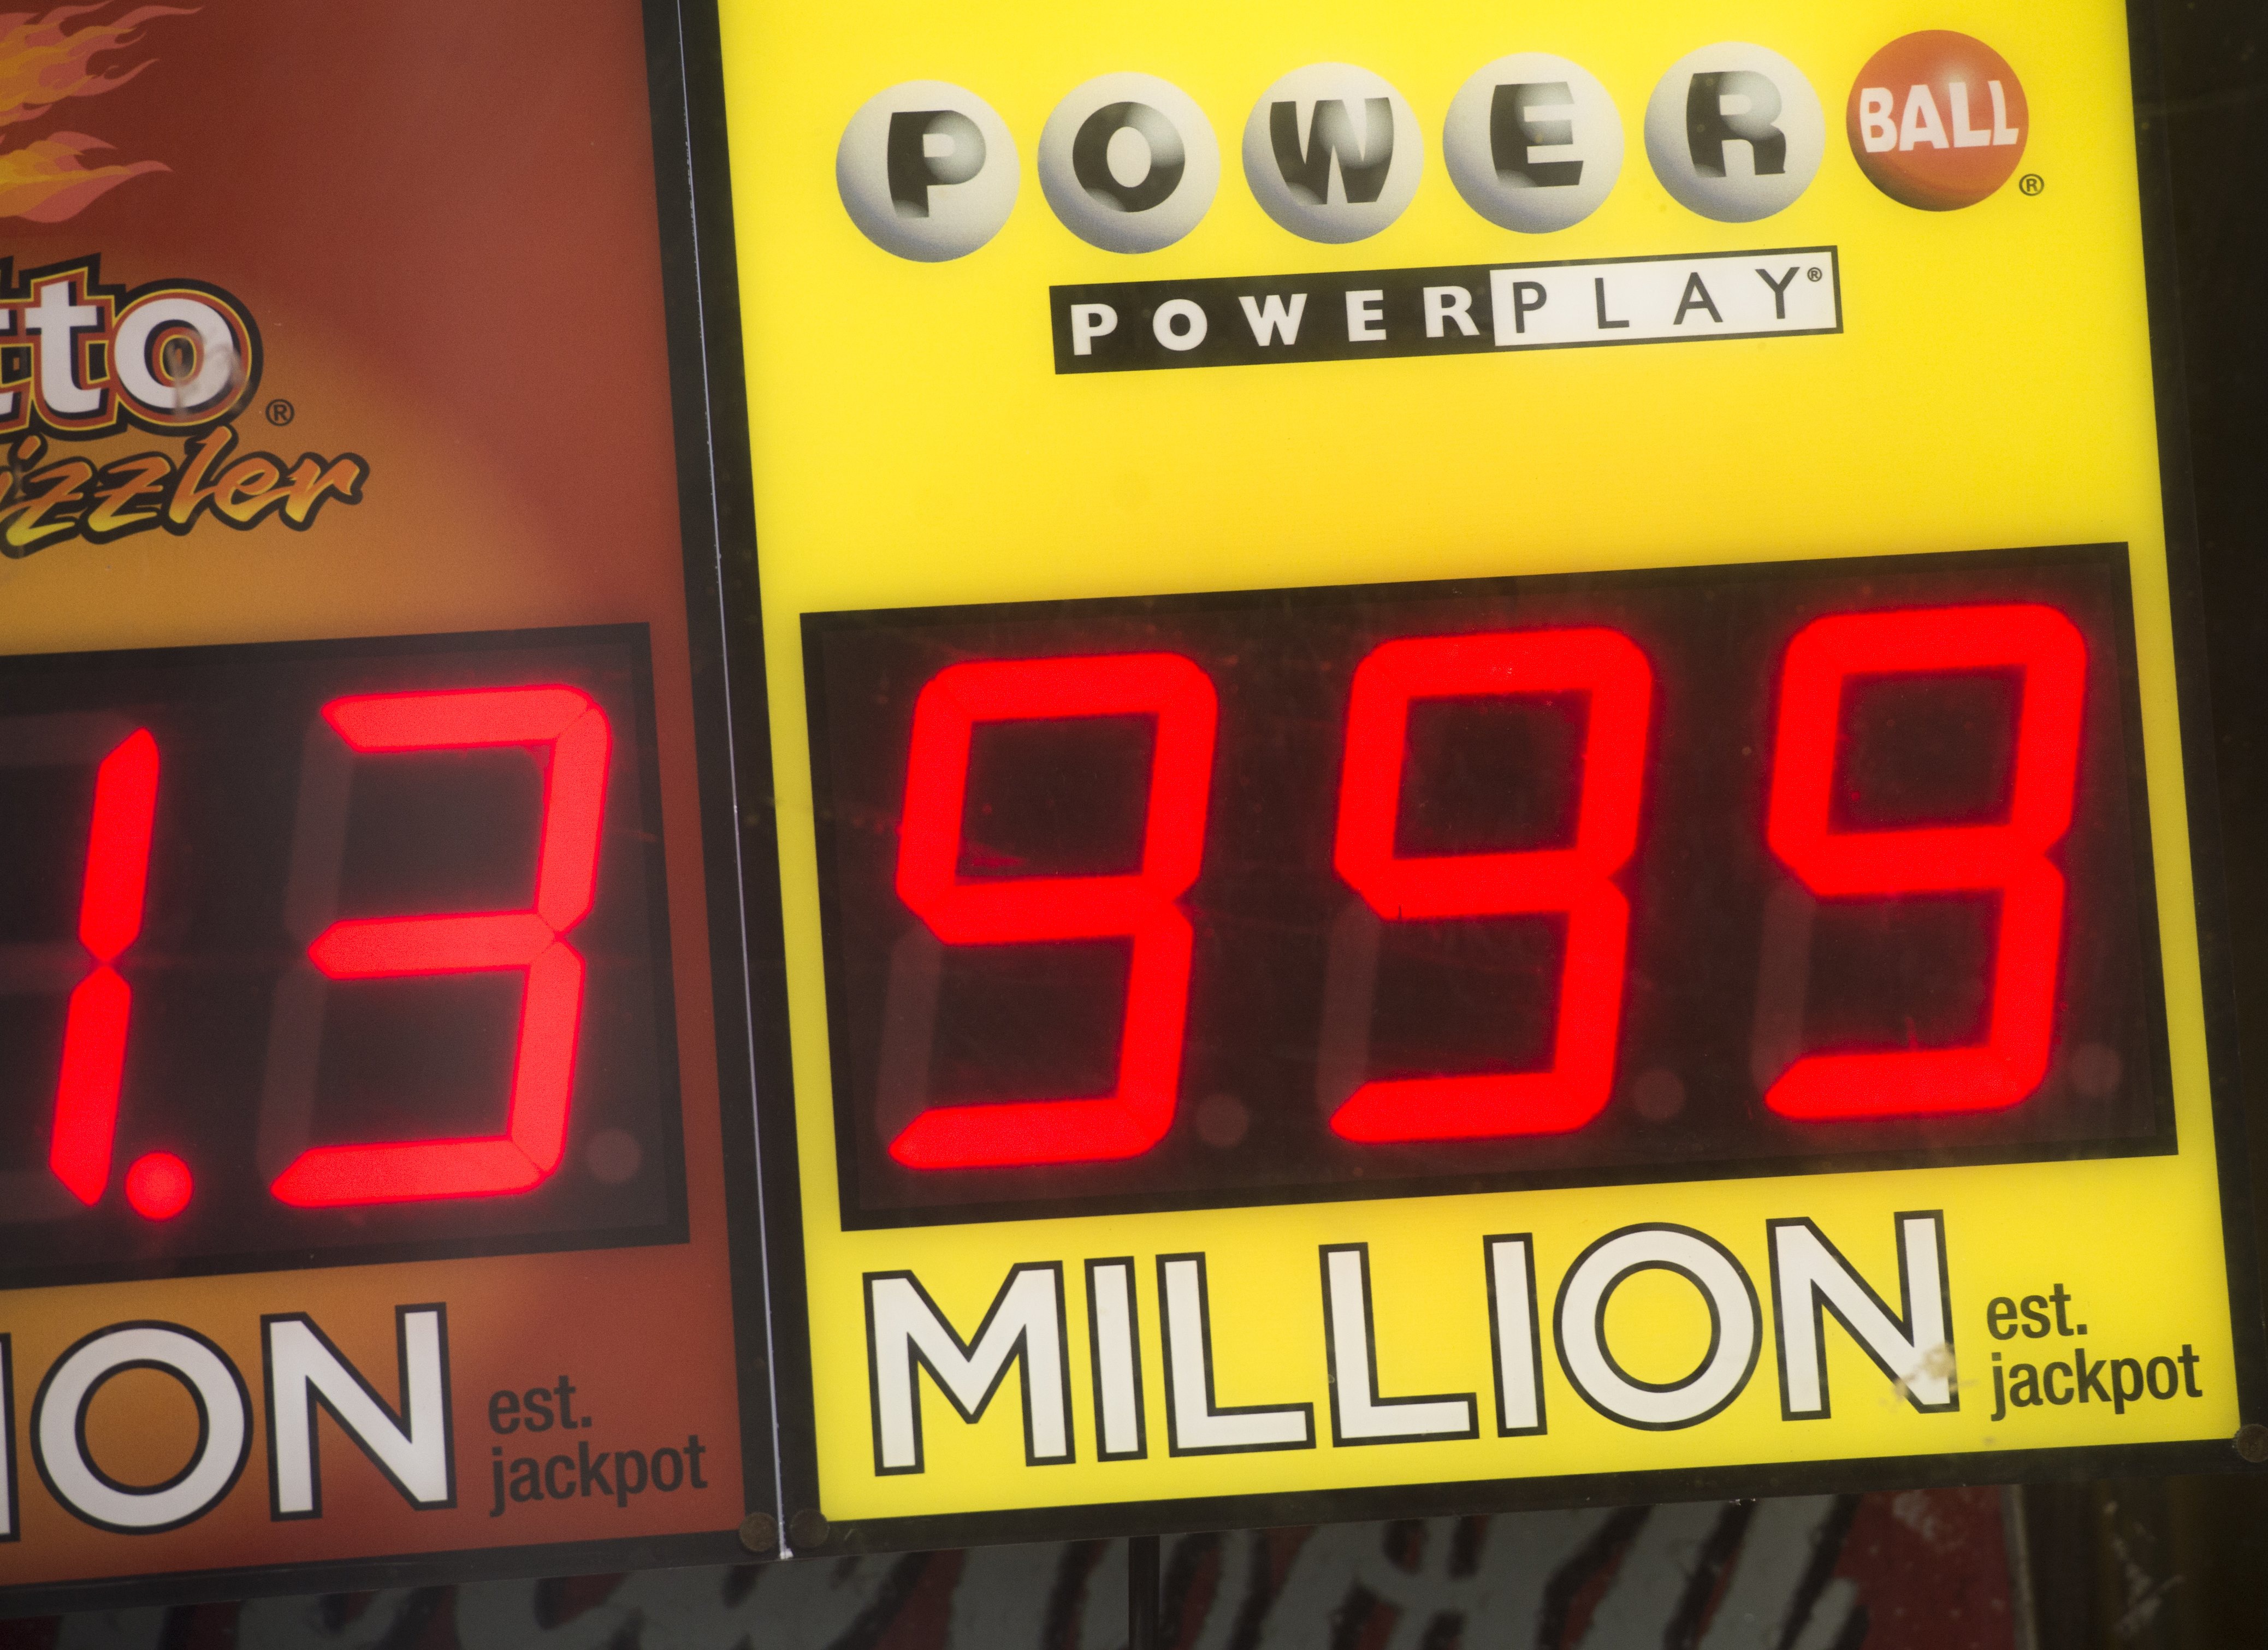 How To Pick Winning Lottery Numbers, Because The Powerball Jackpot Is